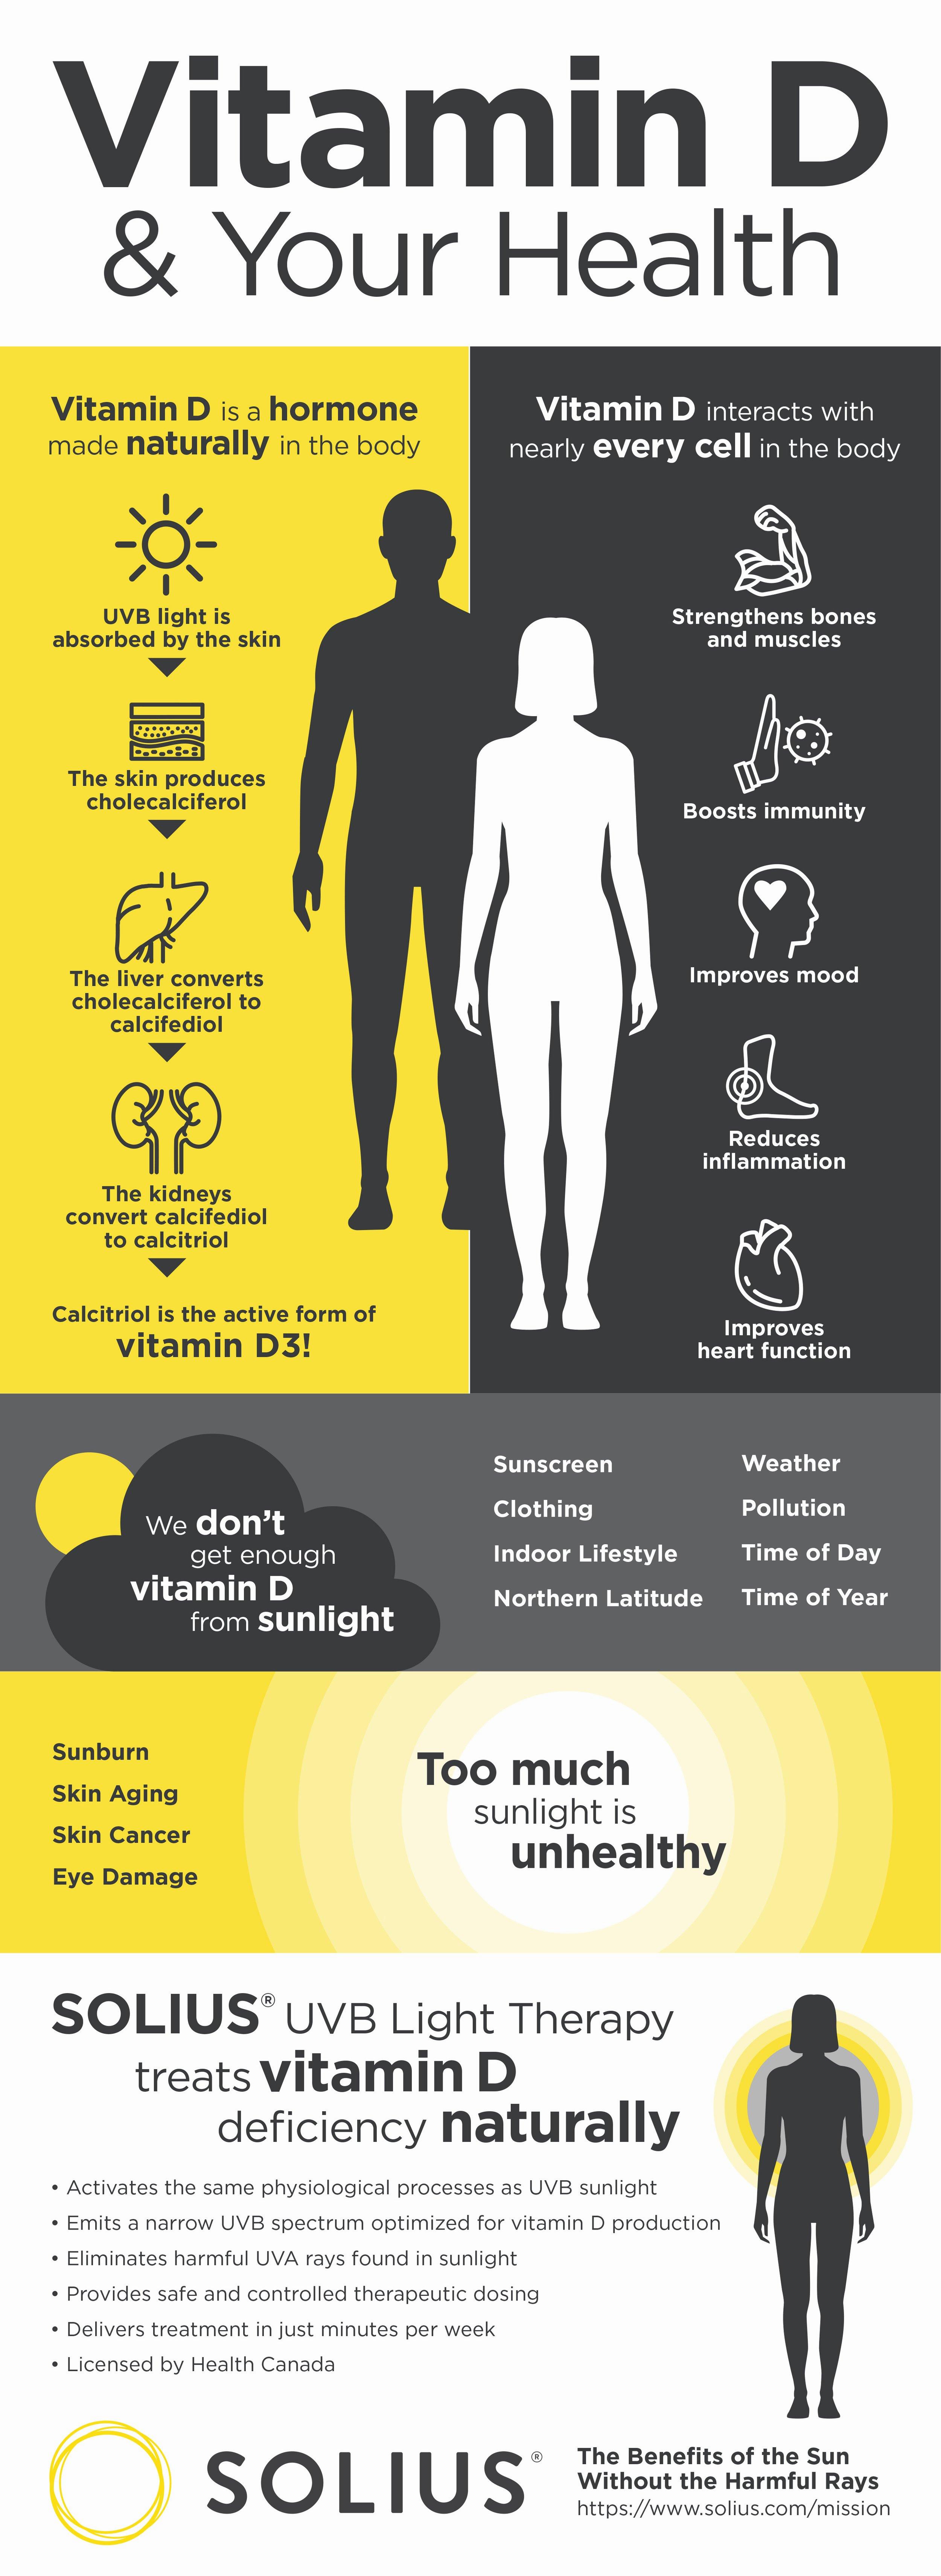 The image is about the benefits of vitamin D and how sunlight helps the body produce it, and the negative effects of too much sunlight.